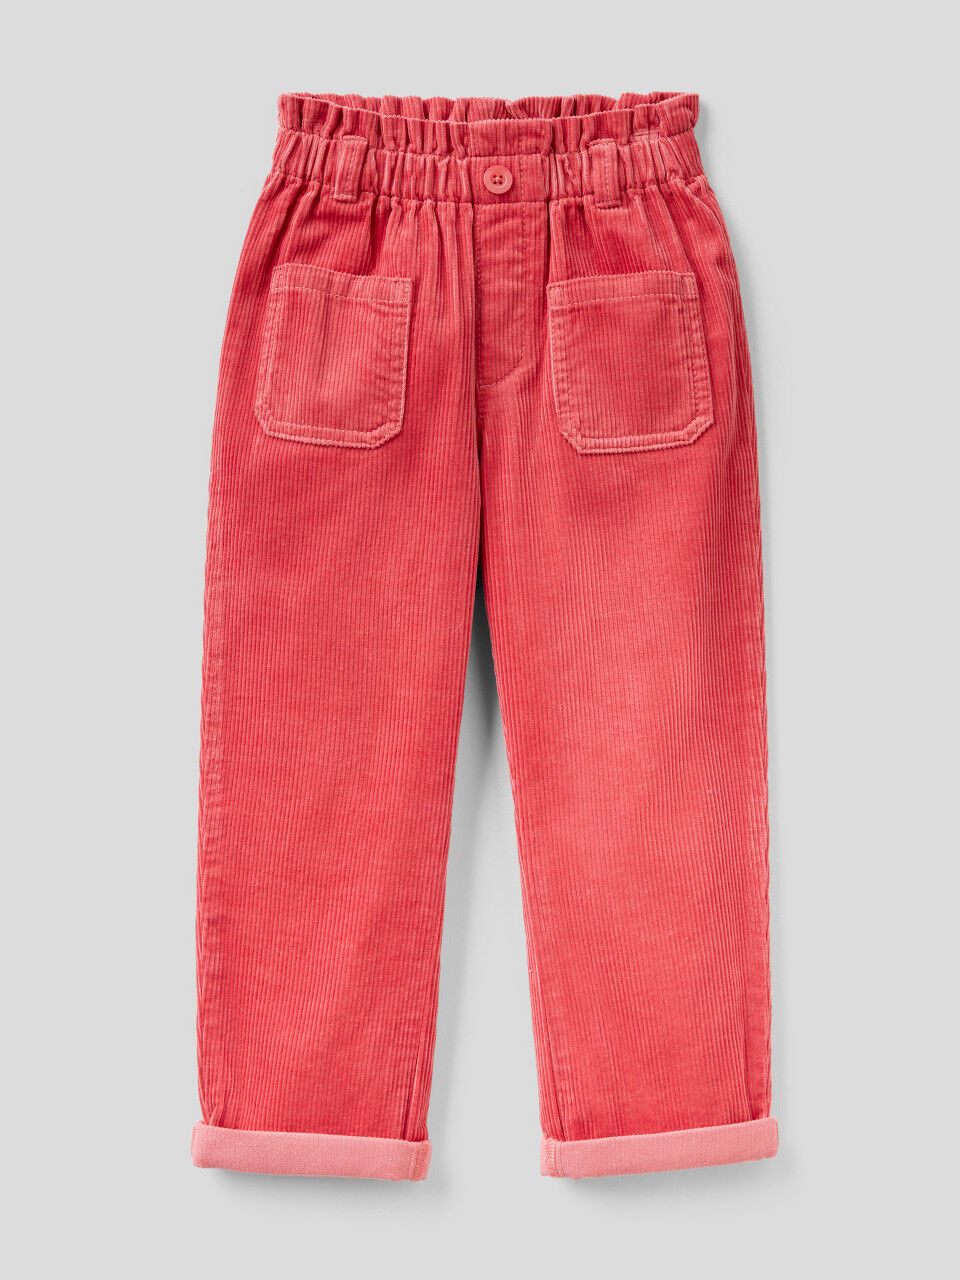 Kids Trousers Age Group 636 Months at Best Price in Bengaluru  Shroff  Enterprises Unit Of Baby In Arms